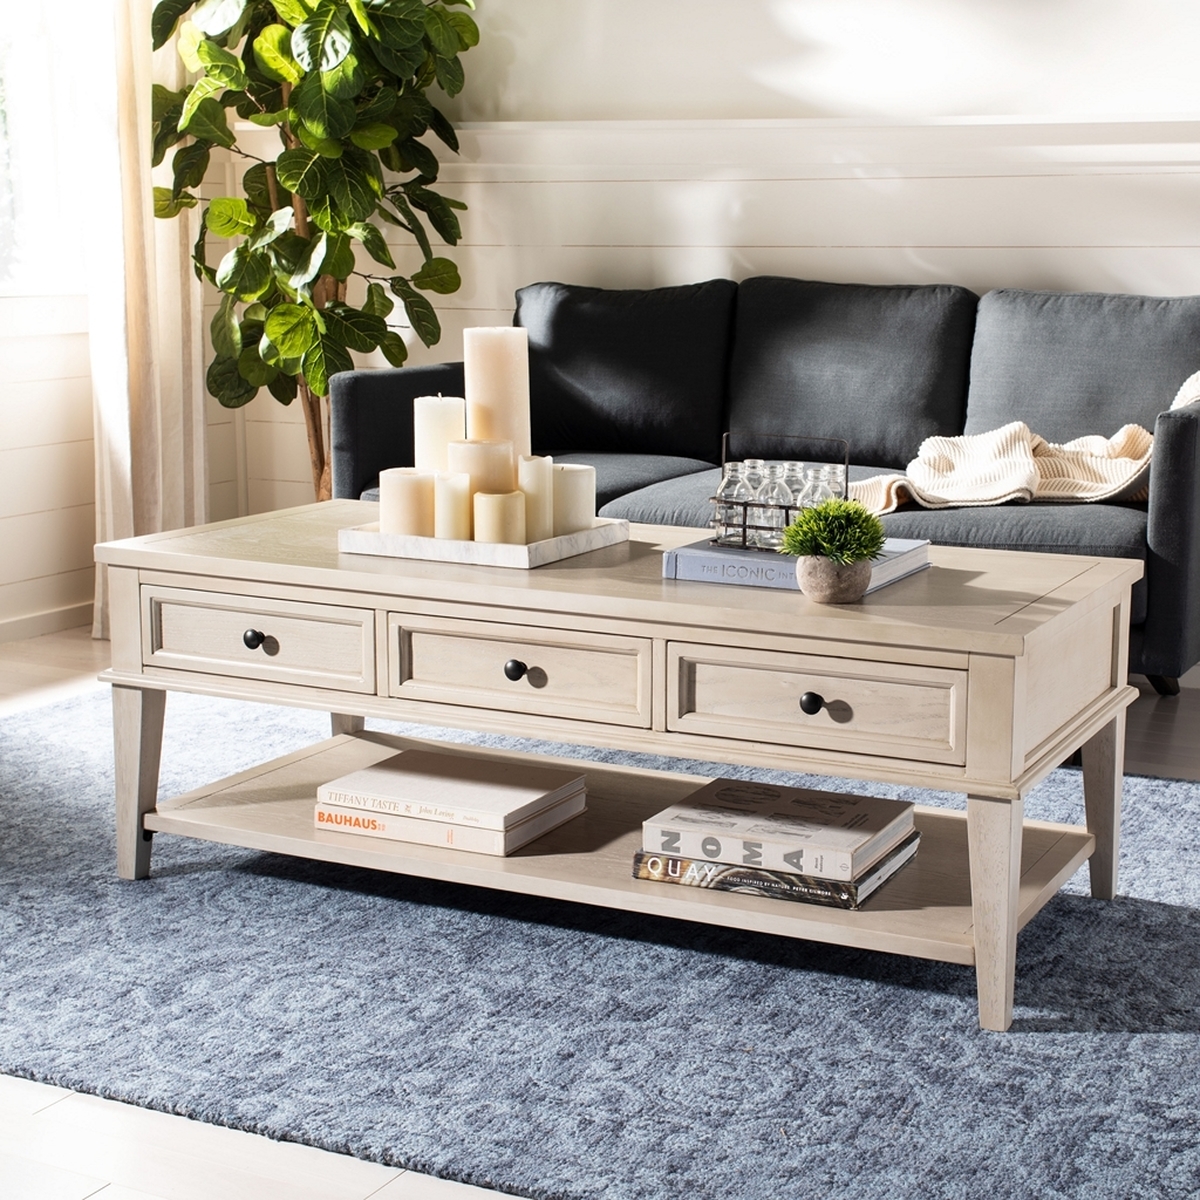 Manelin Coffee Table With Storage Drawers - White Wash - Arlo Home - Image 2